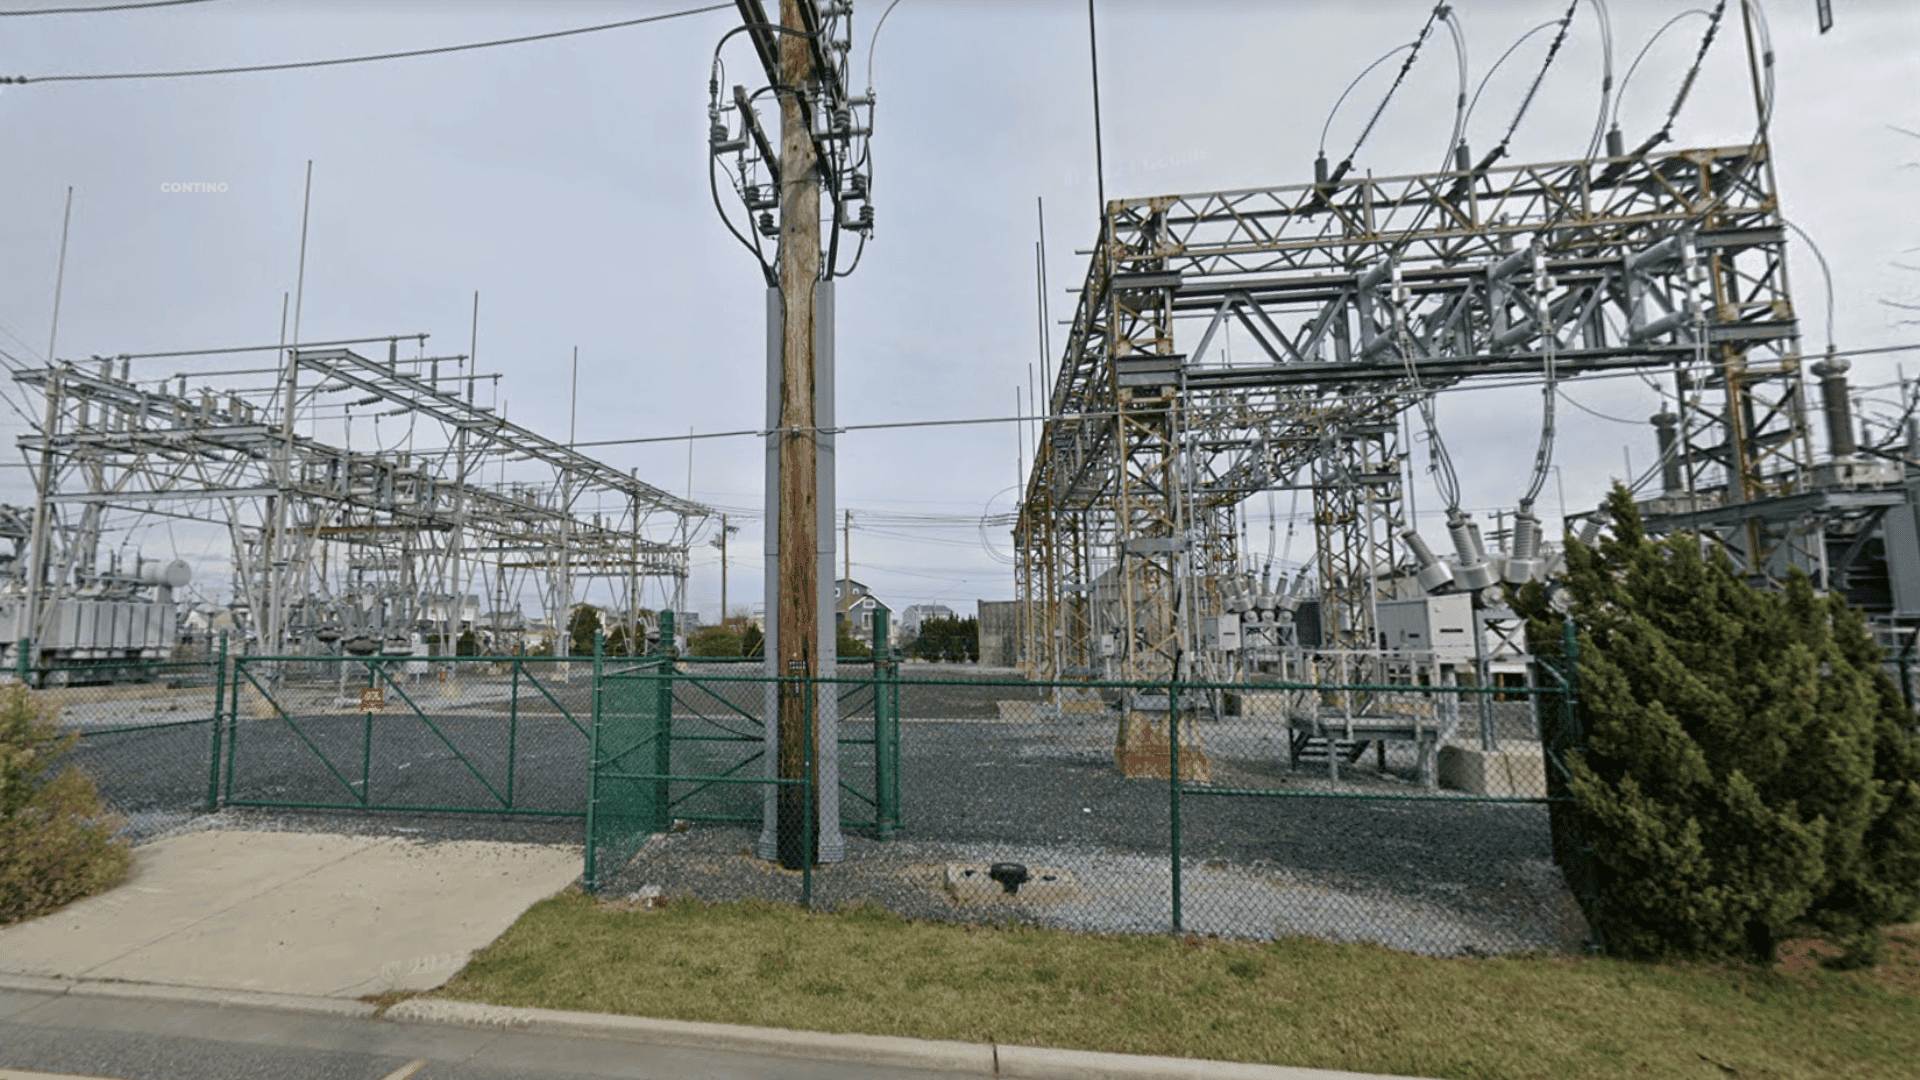 Wildwood In Black Out After Electrical Plant Fire